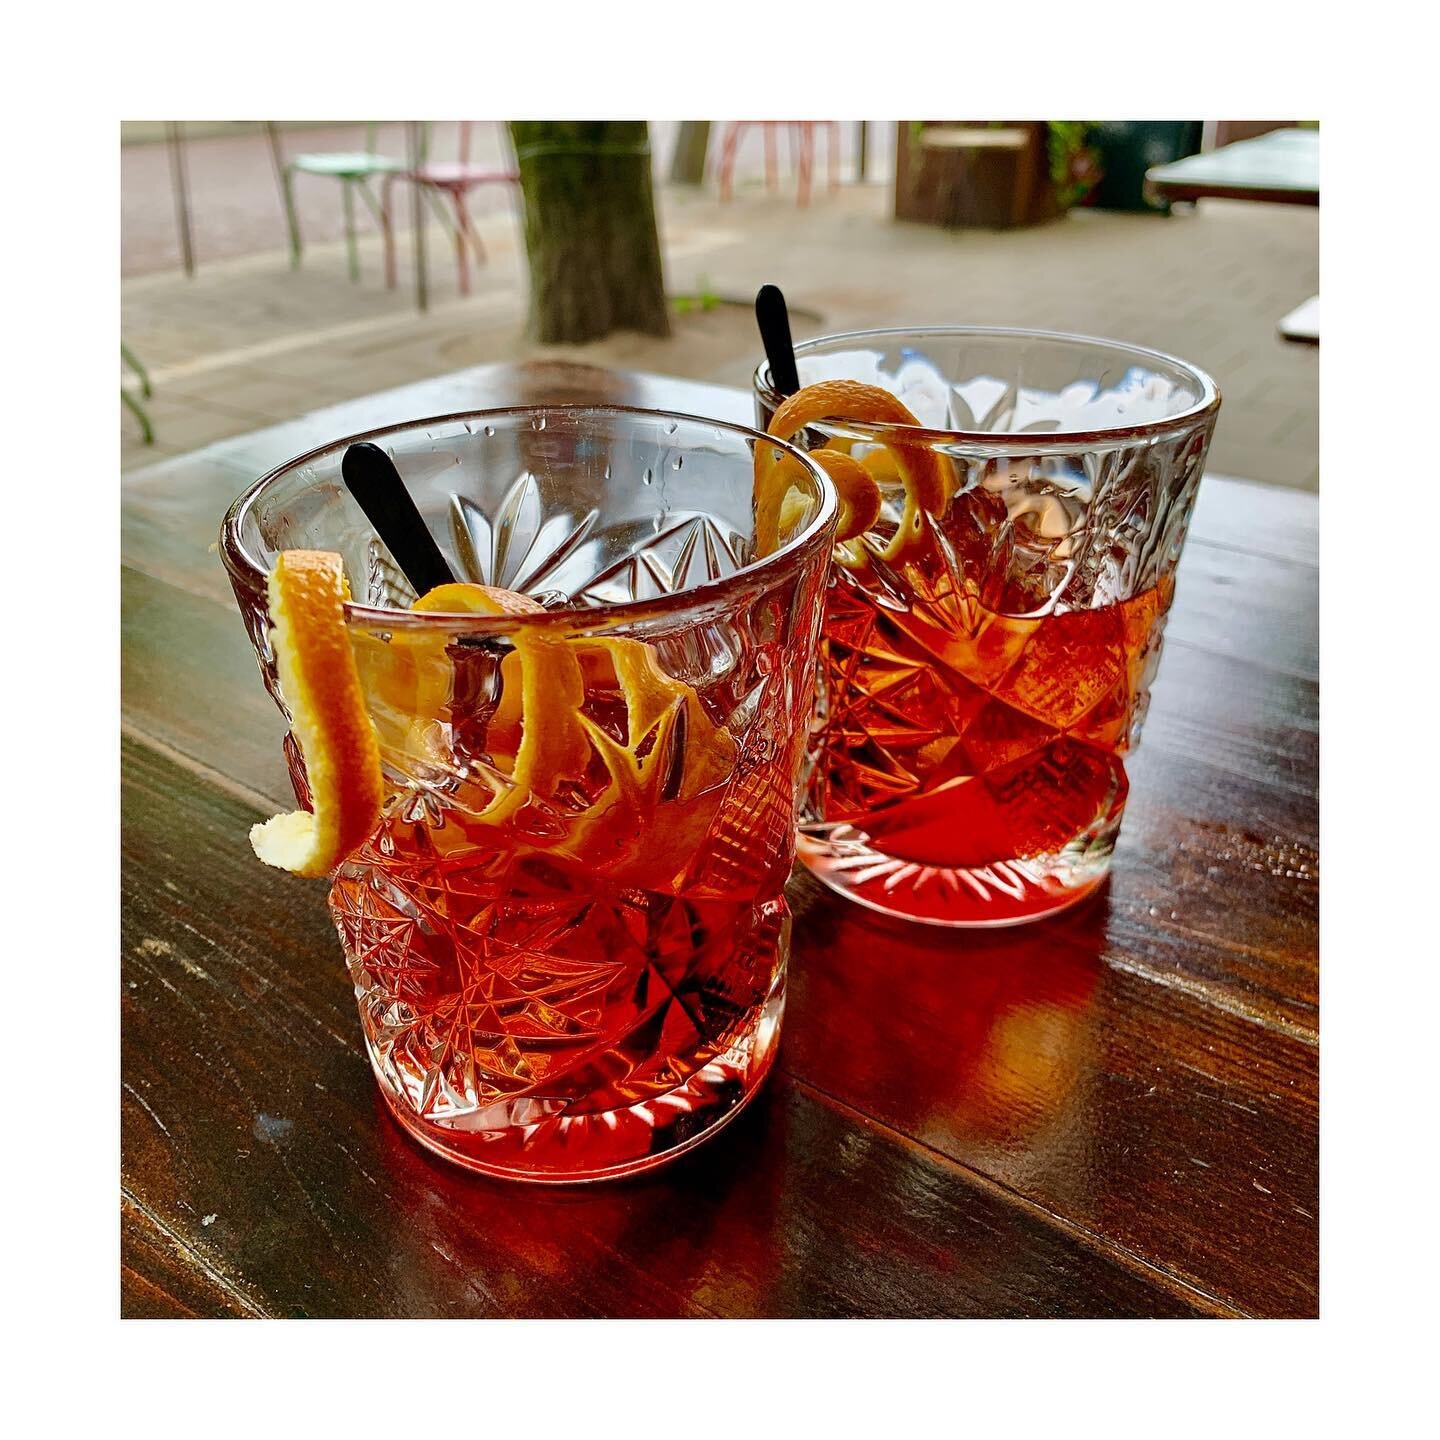 Celebrating the @f1 triple of @maxverstappen1 and @redbullracing with a Negroni of course&hellip; as any red-blooded Dutchman would do. 😉🇳🇱🏁 &hellip; It&rsquo;s The Spirit of Monoposto. 🥂⚓️
*
*
Monoposto Yachts are distinct hand-crafted yachts t